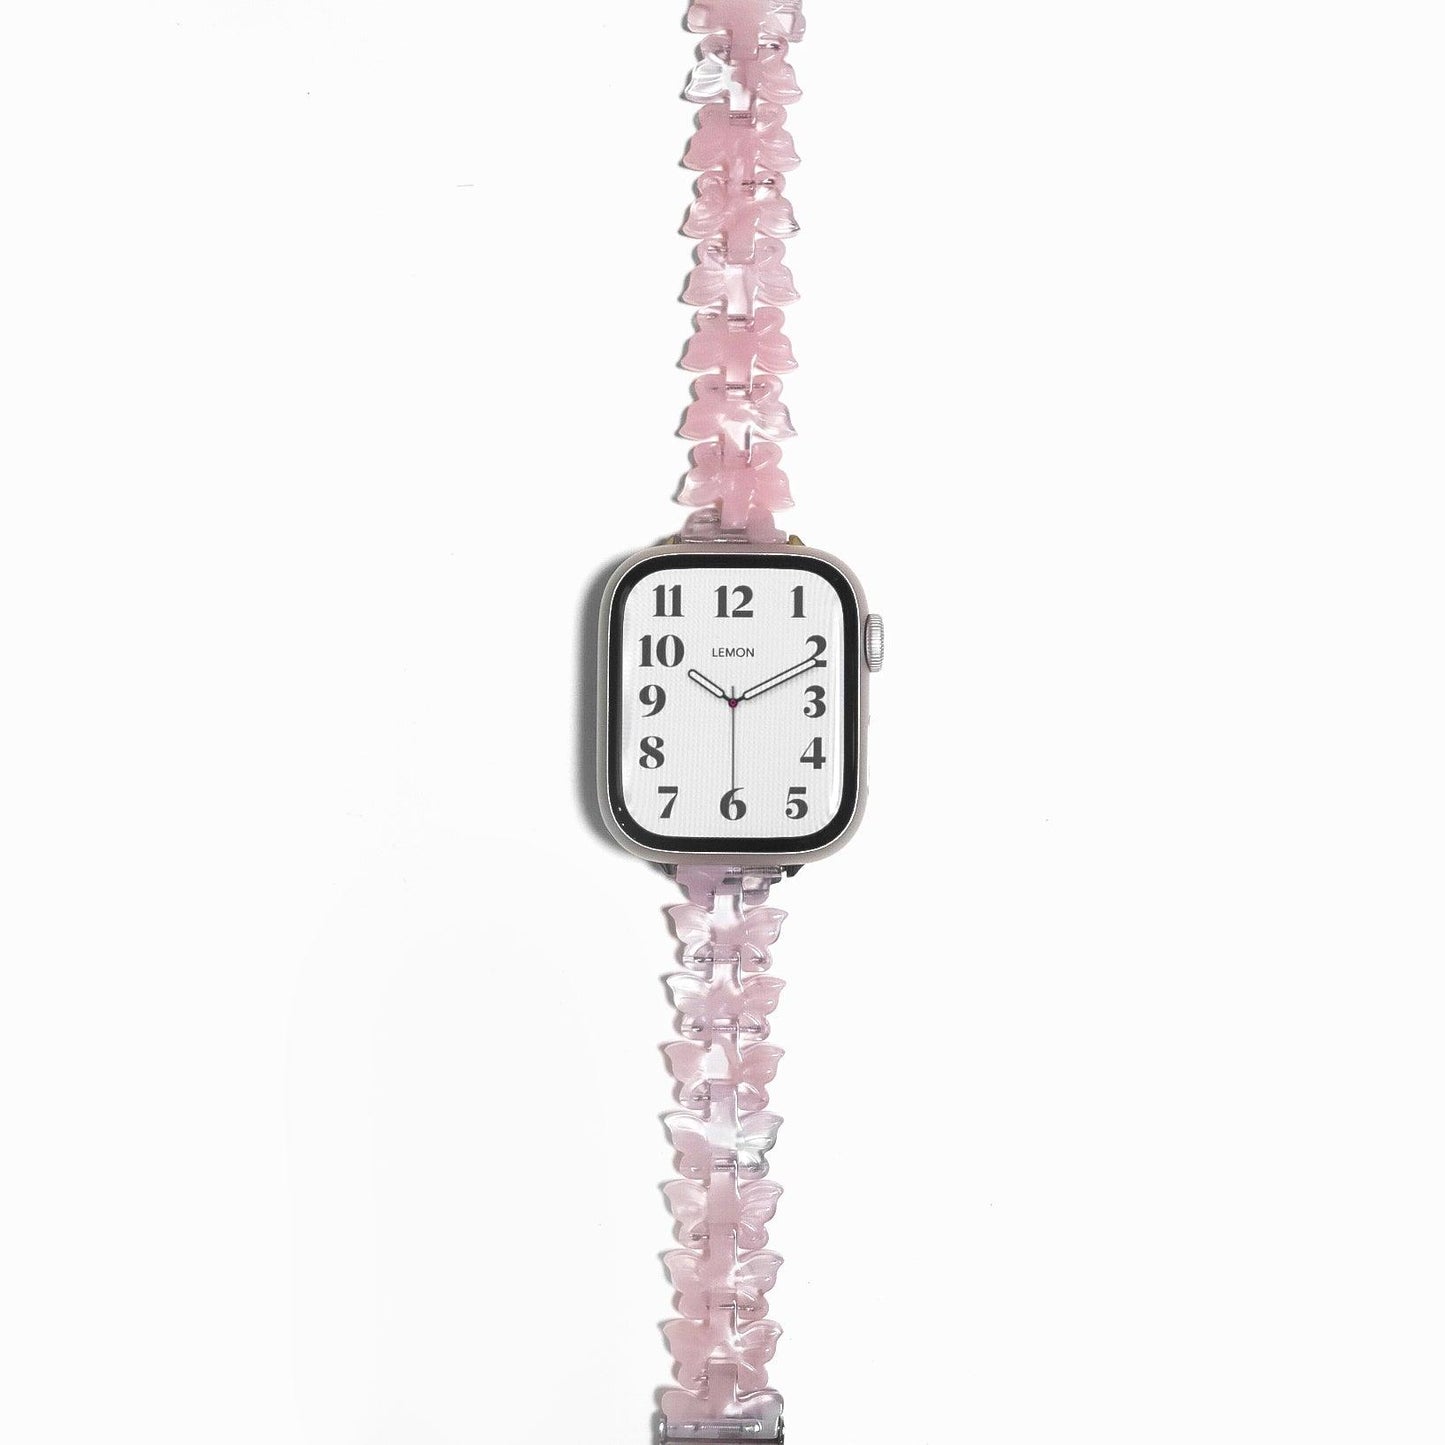 Resin Butterfly Apple Watch Band - Light Pink